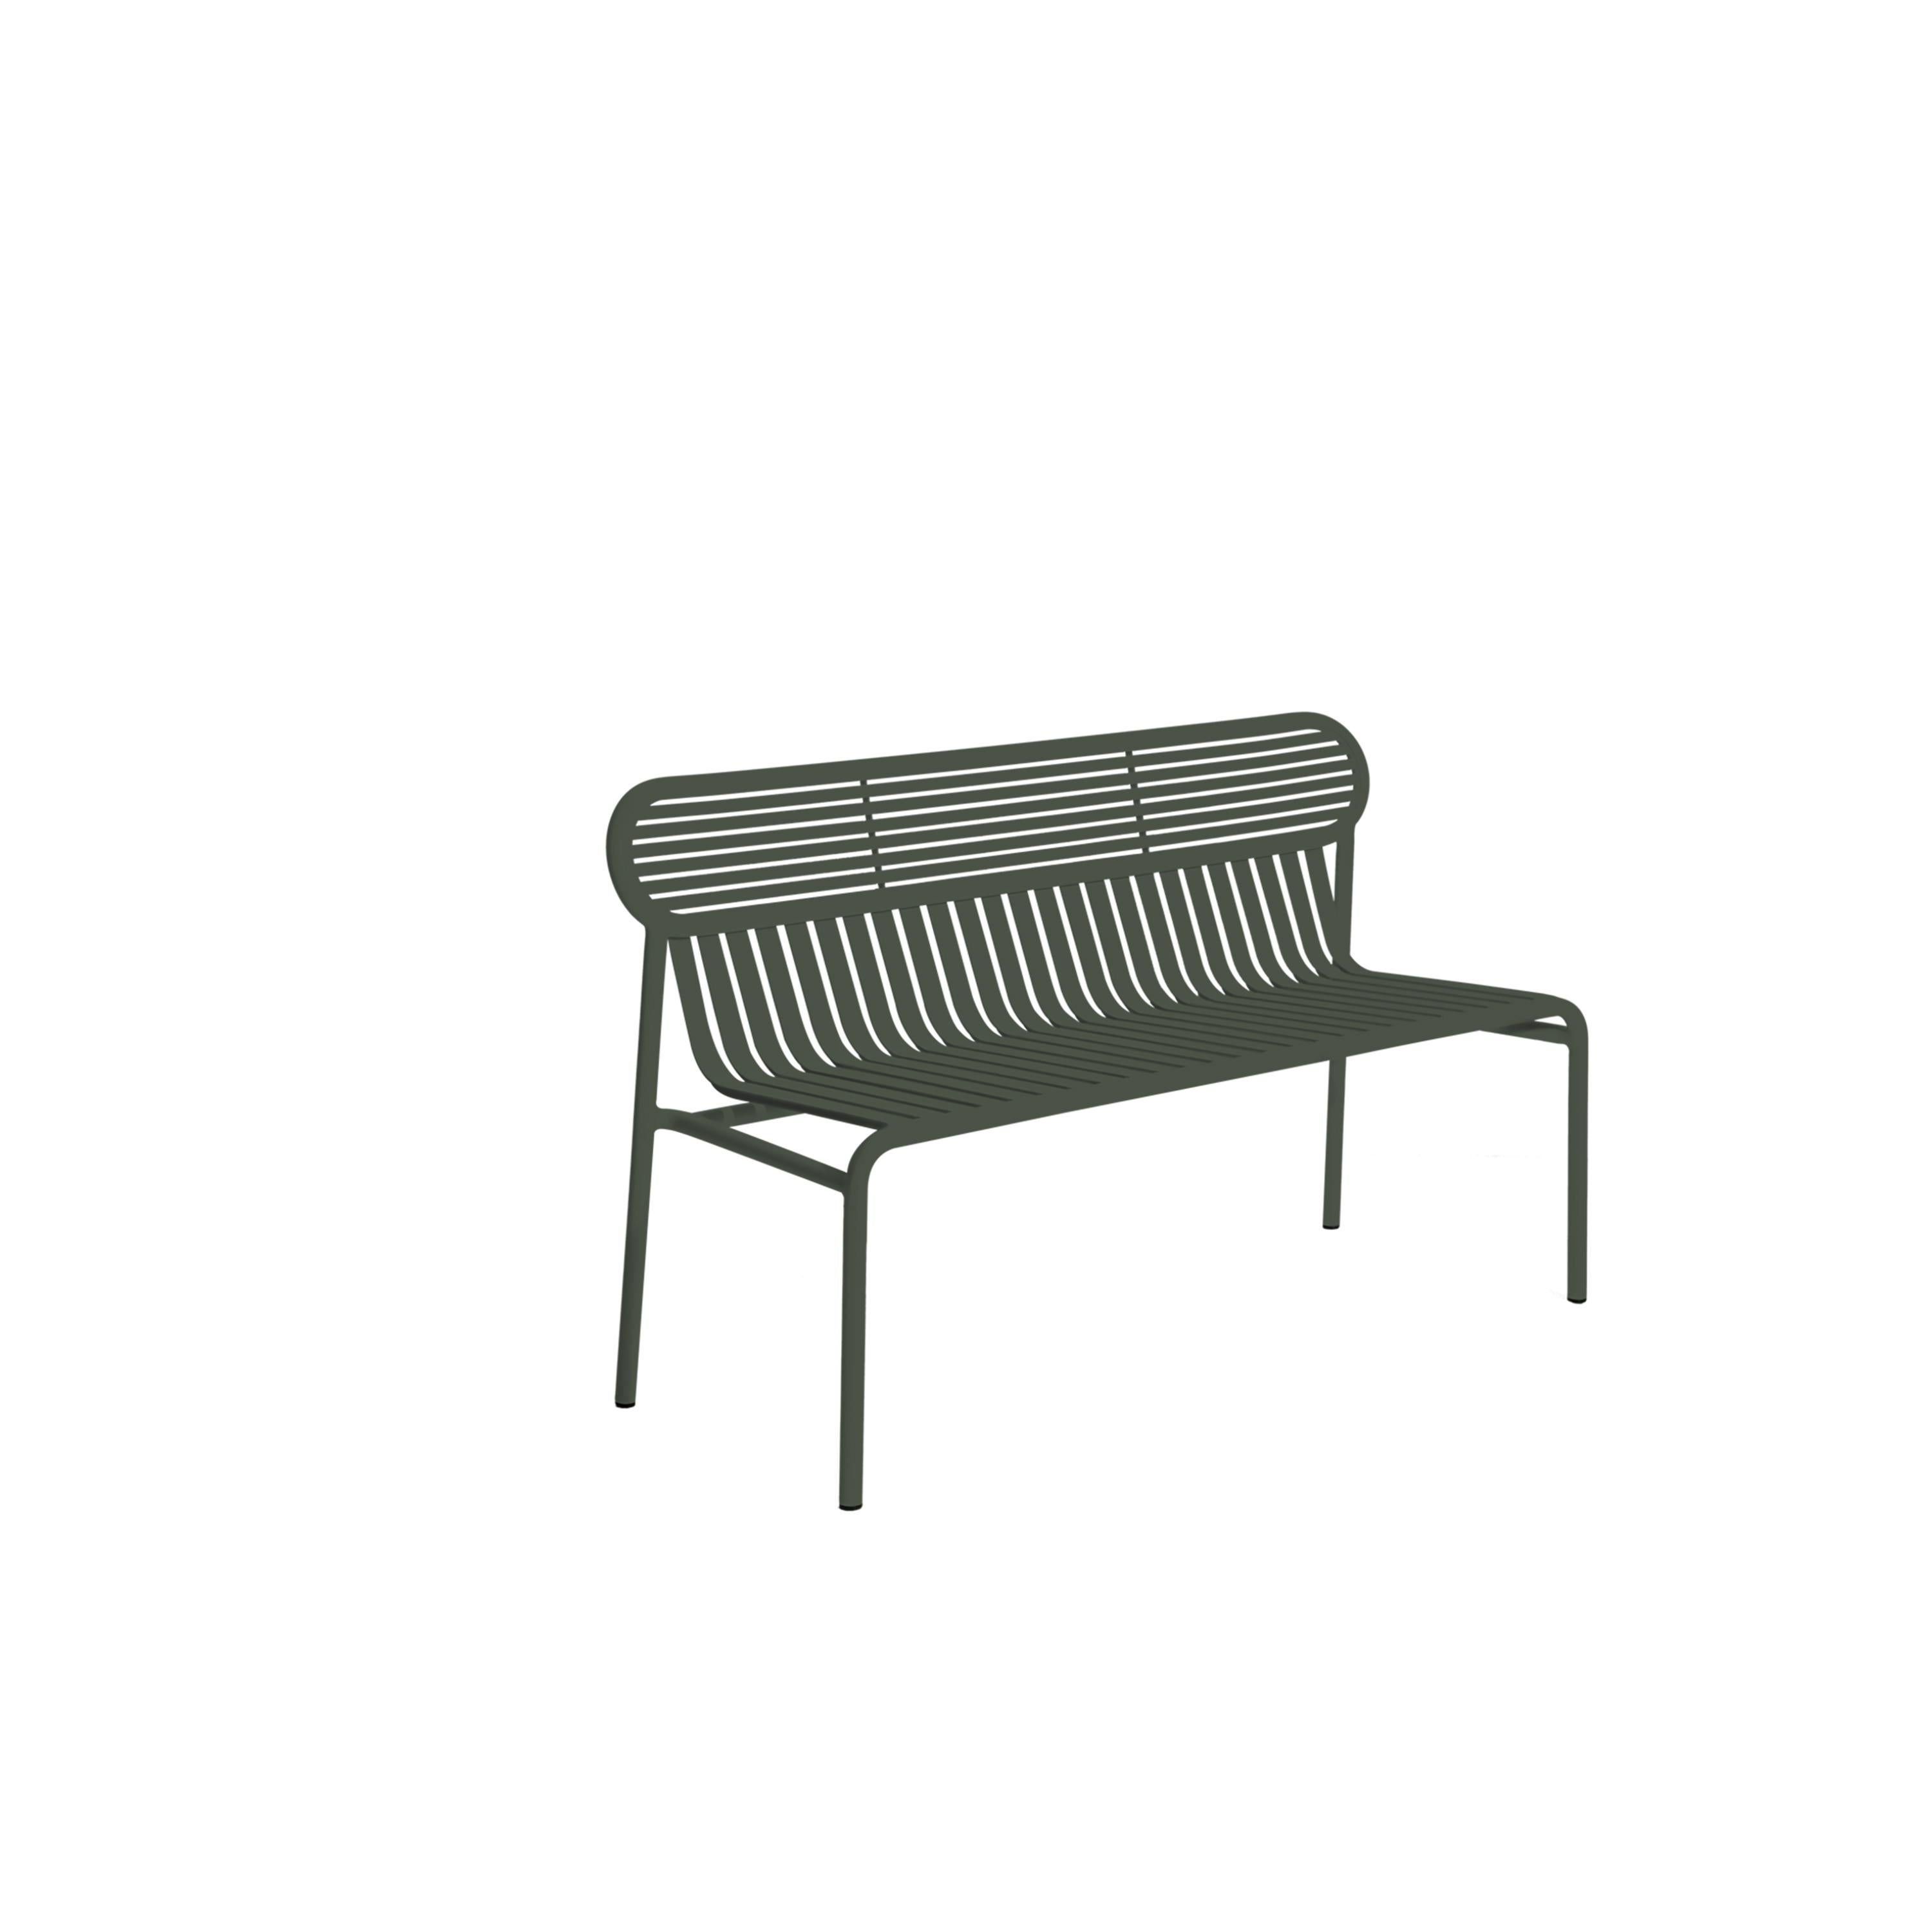 Petite Friture Week-End Bench in Glass Green Aluminium by Studio BrichetZiegler, 2017

The week-end collection is a full range of outdoor furniture, in aluminium grained epoxy paint, matt finish, that includes 18 functions and 8 colours for the